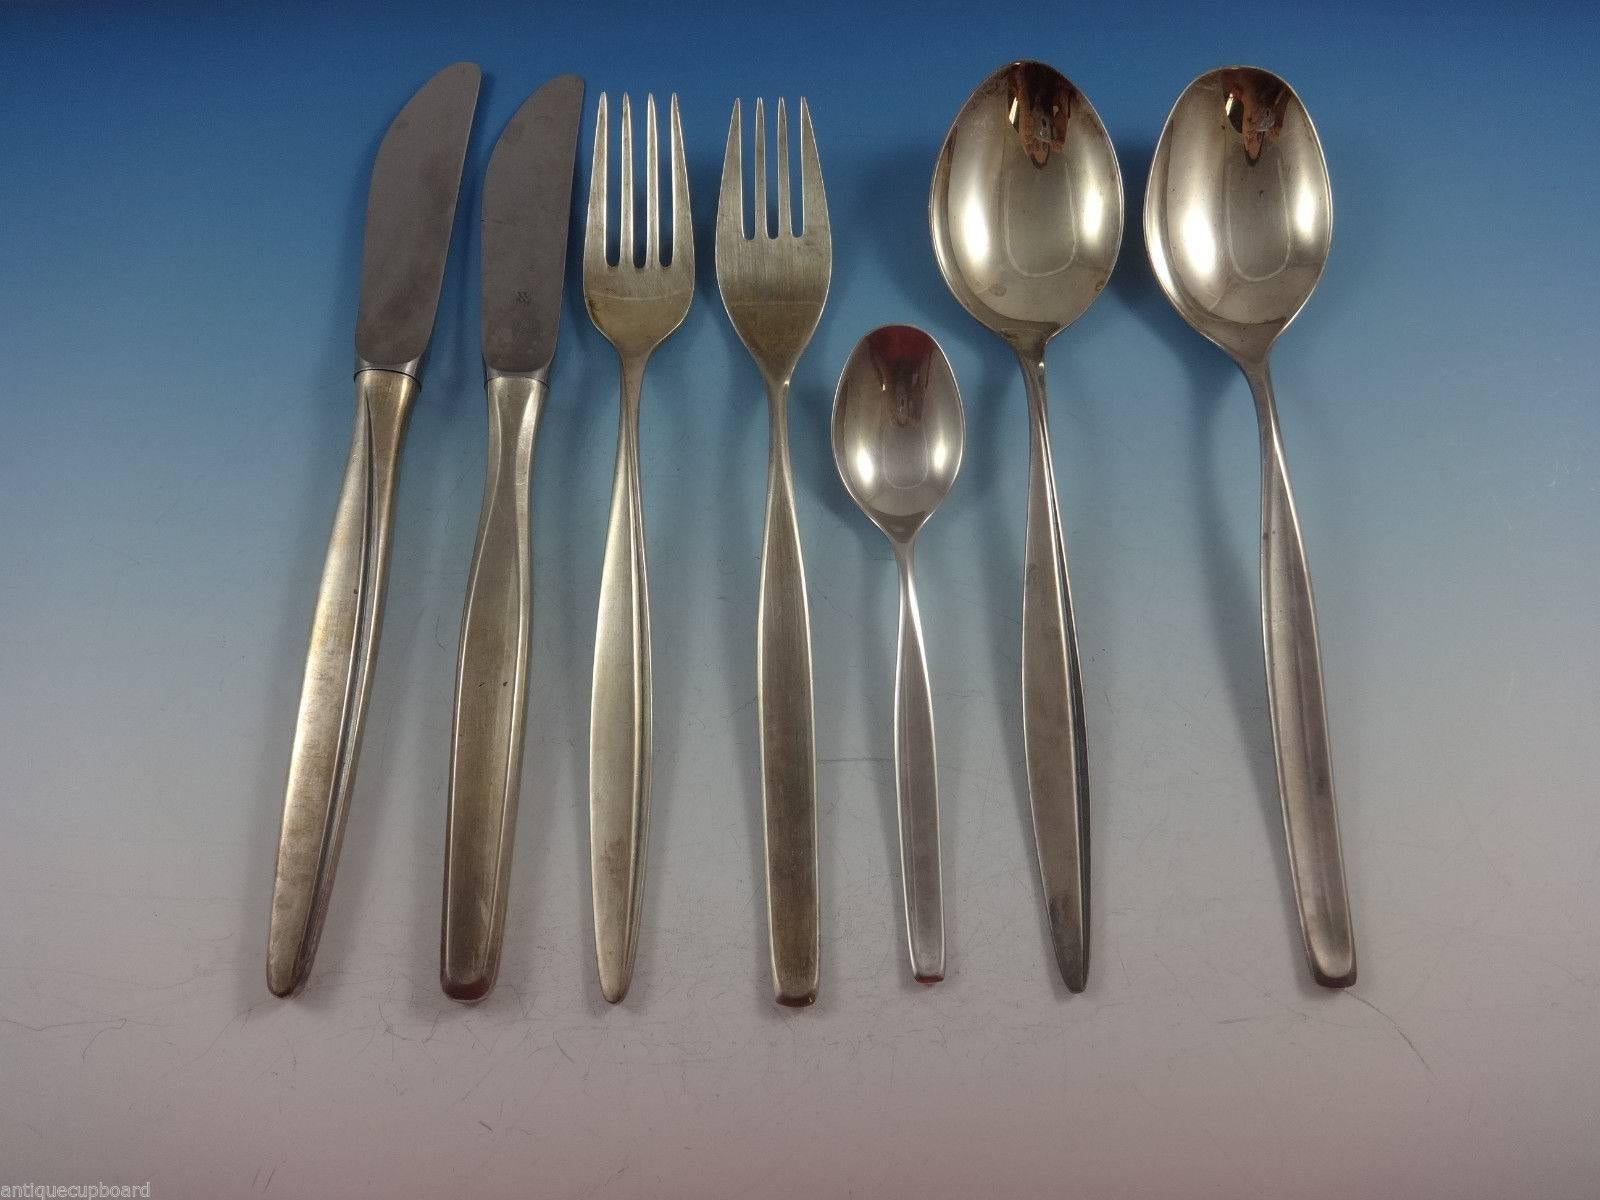 800 Silver set dinner size Mid-Century modern design flatware set in vintage box, 24 pieces. This set includes:

Six Dinner knives, 8 7/8